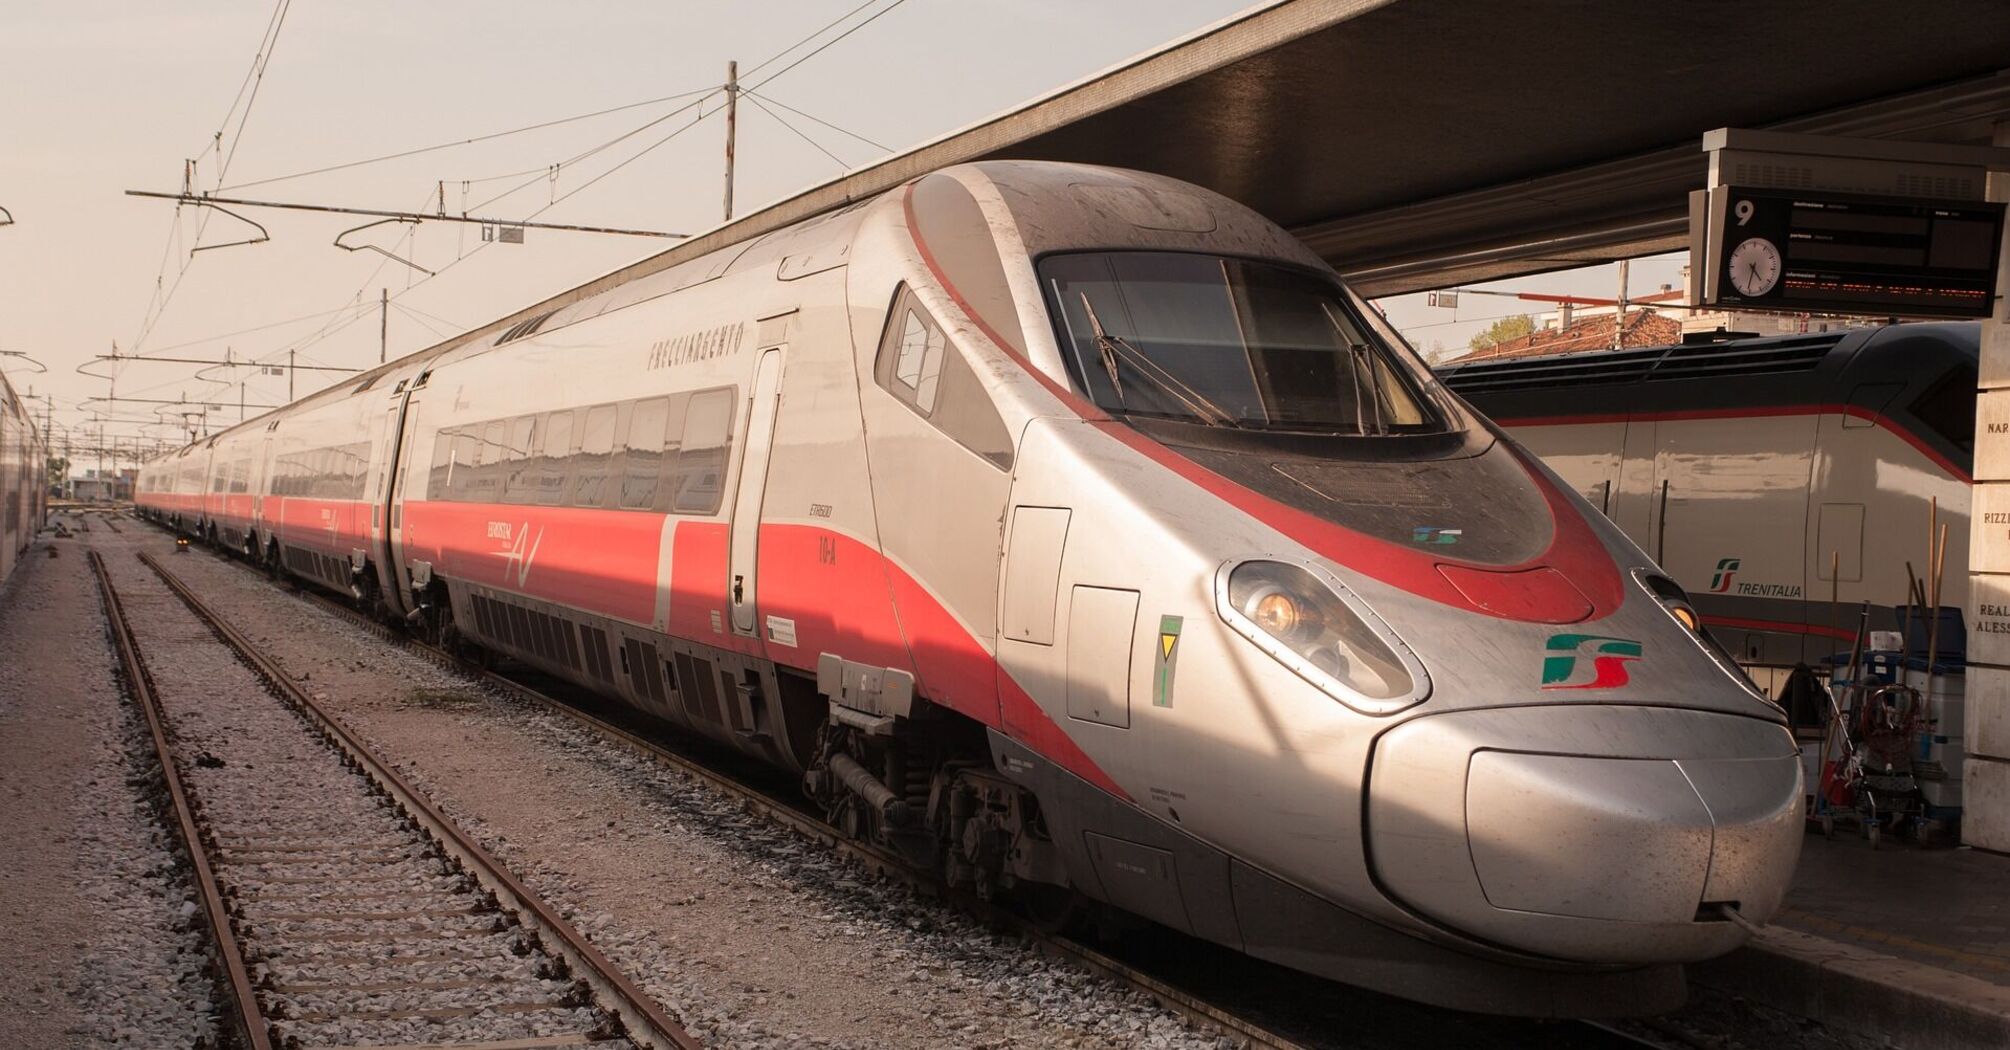 For the first time in 16 years: A new European rail link will connect two countries